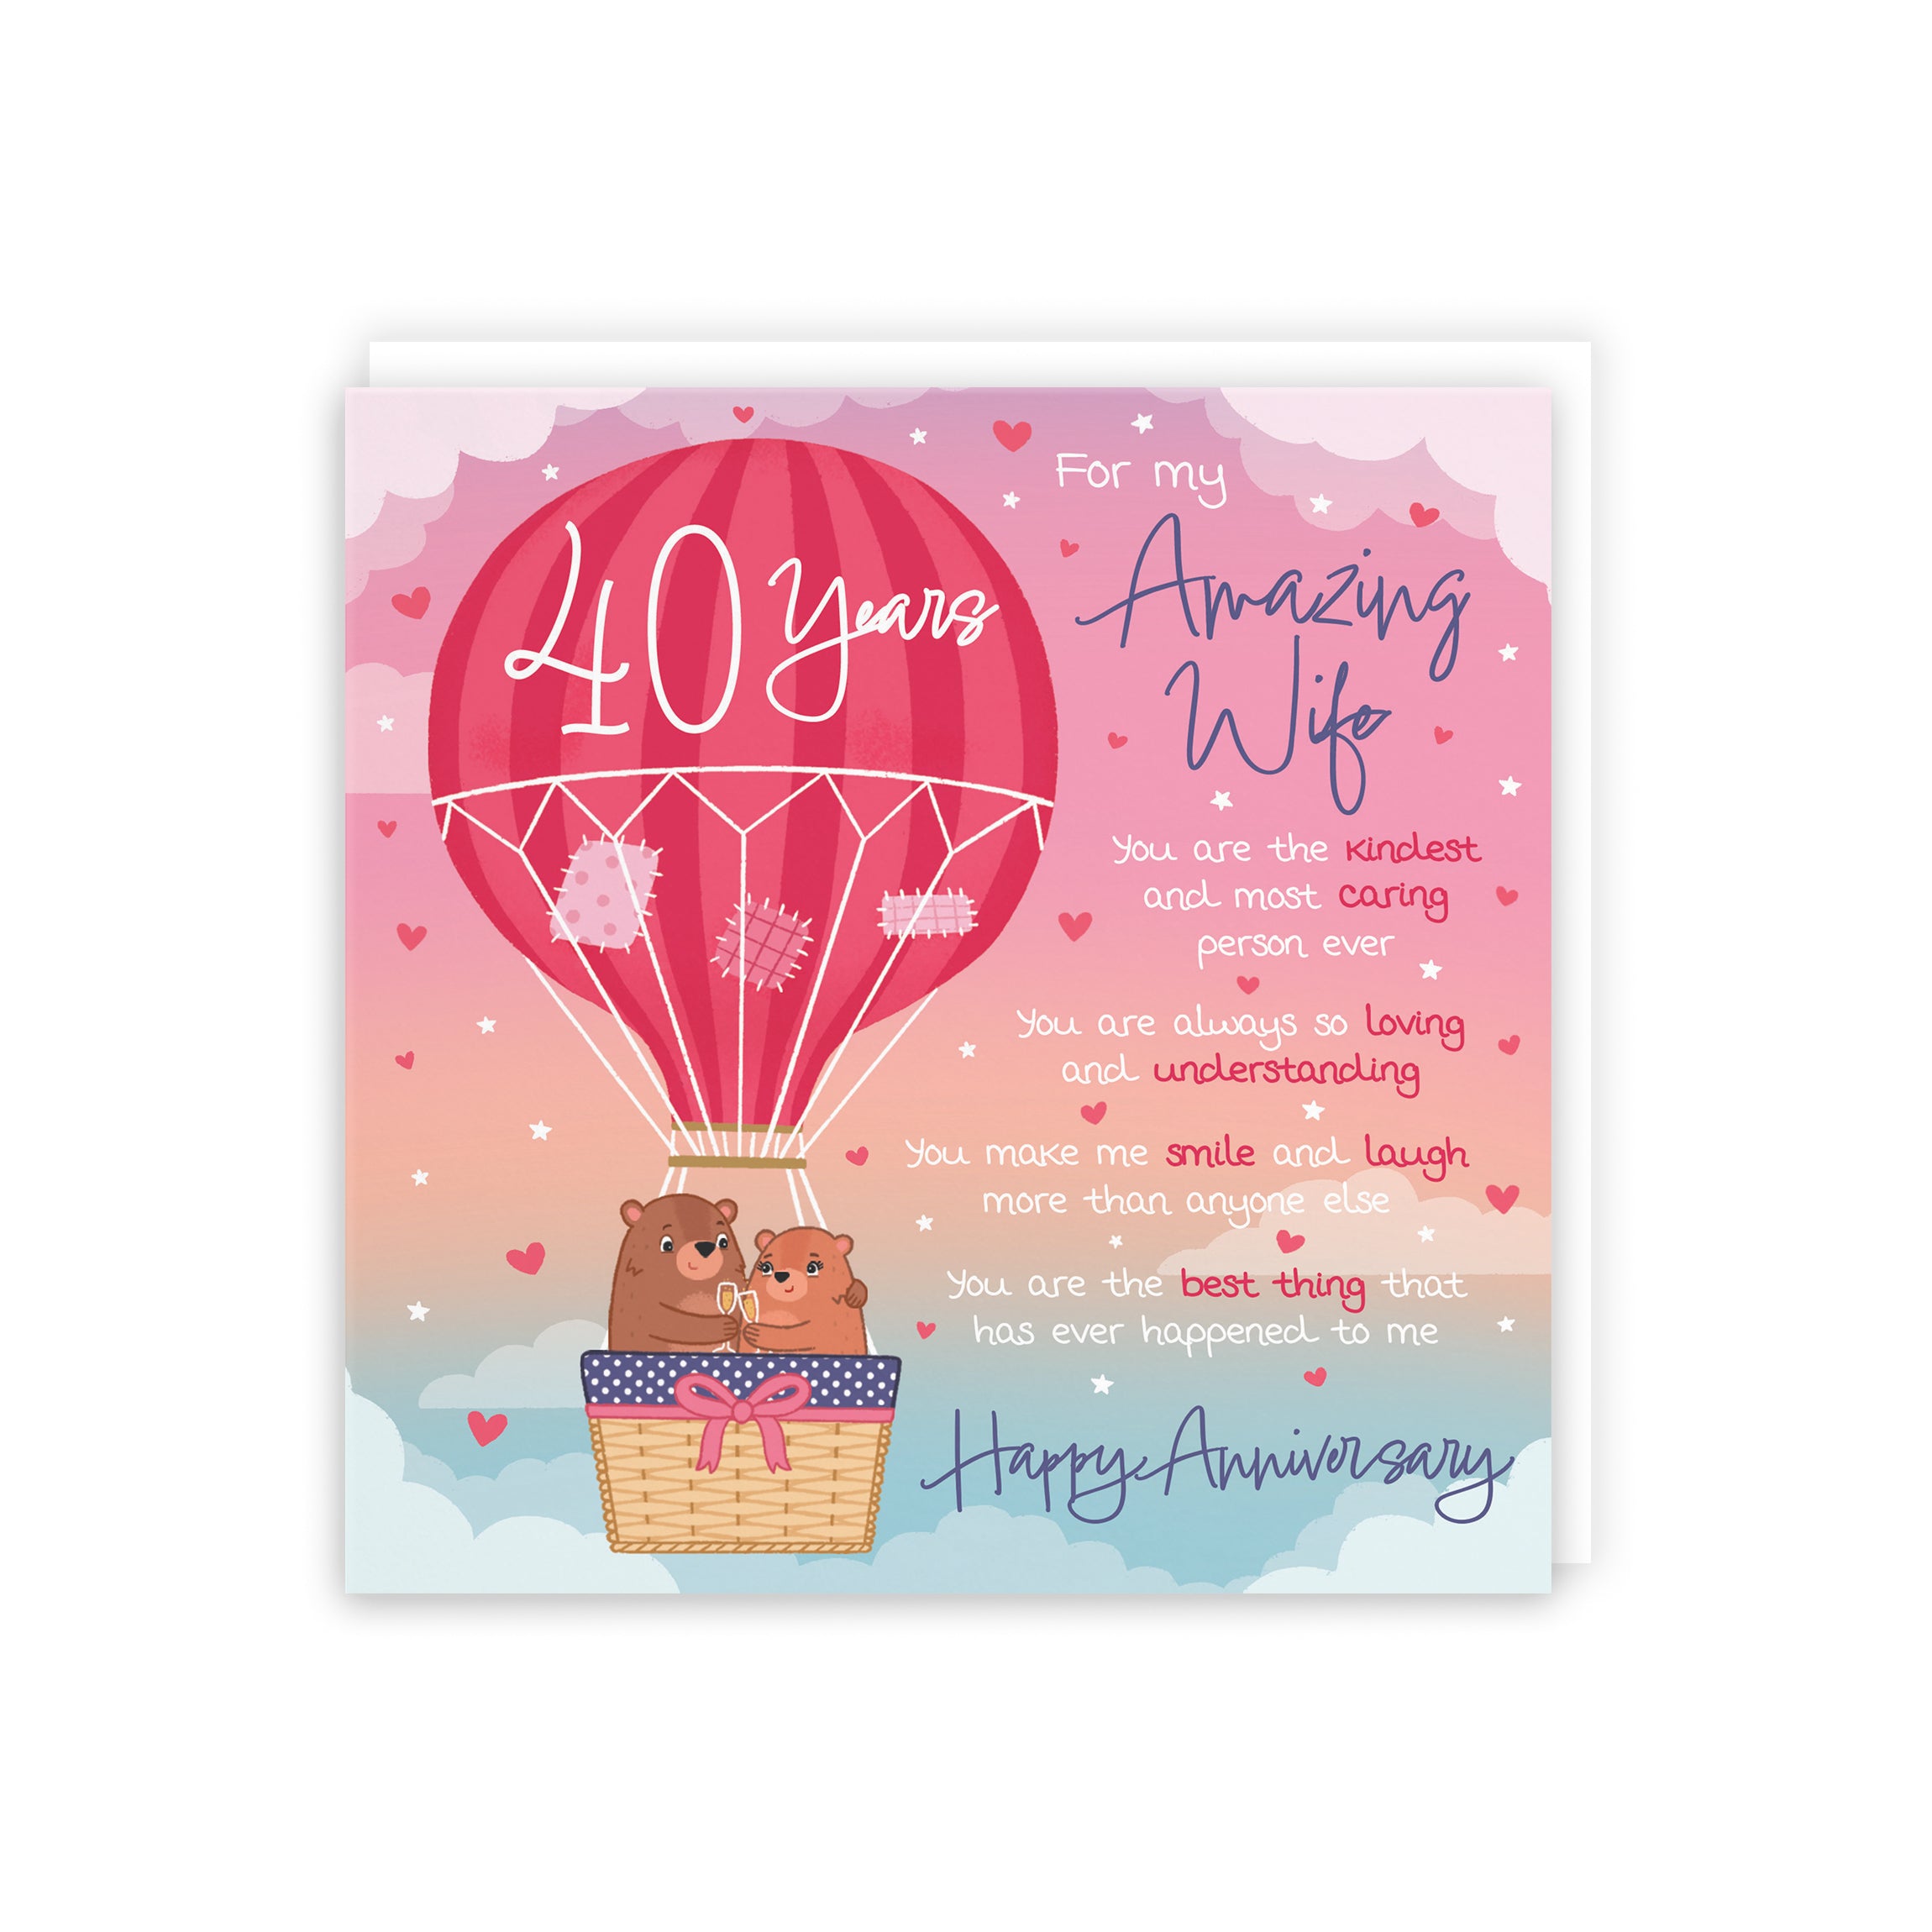 Wife 40th Anniversary Poem Card Love Is In The Air Cute Bears